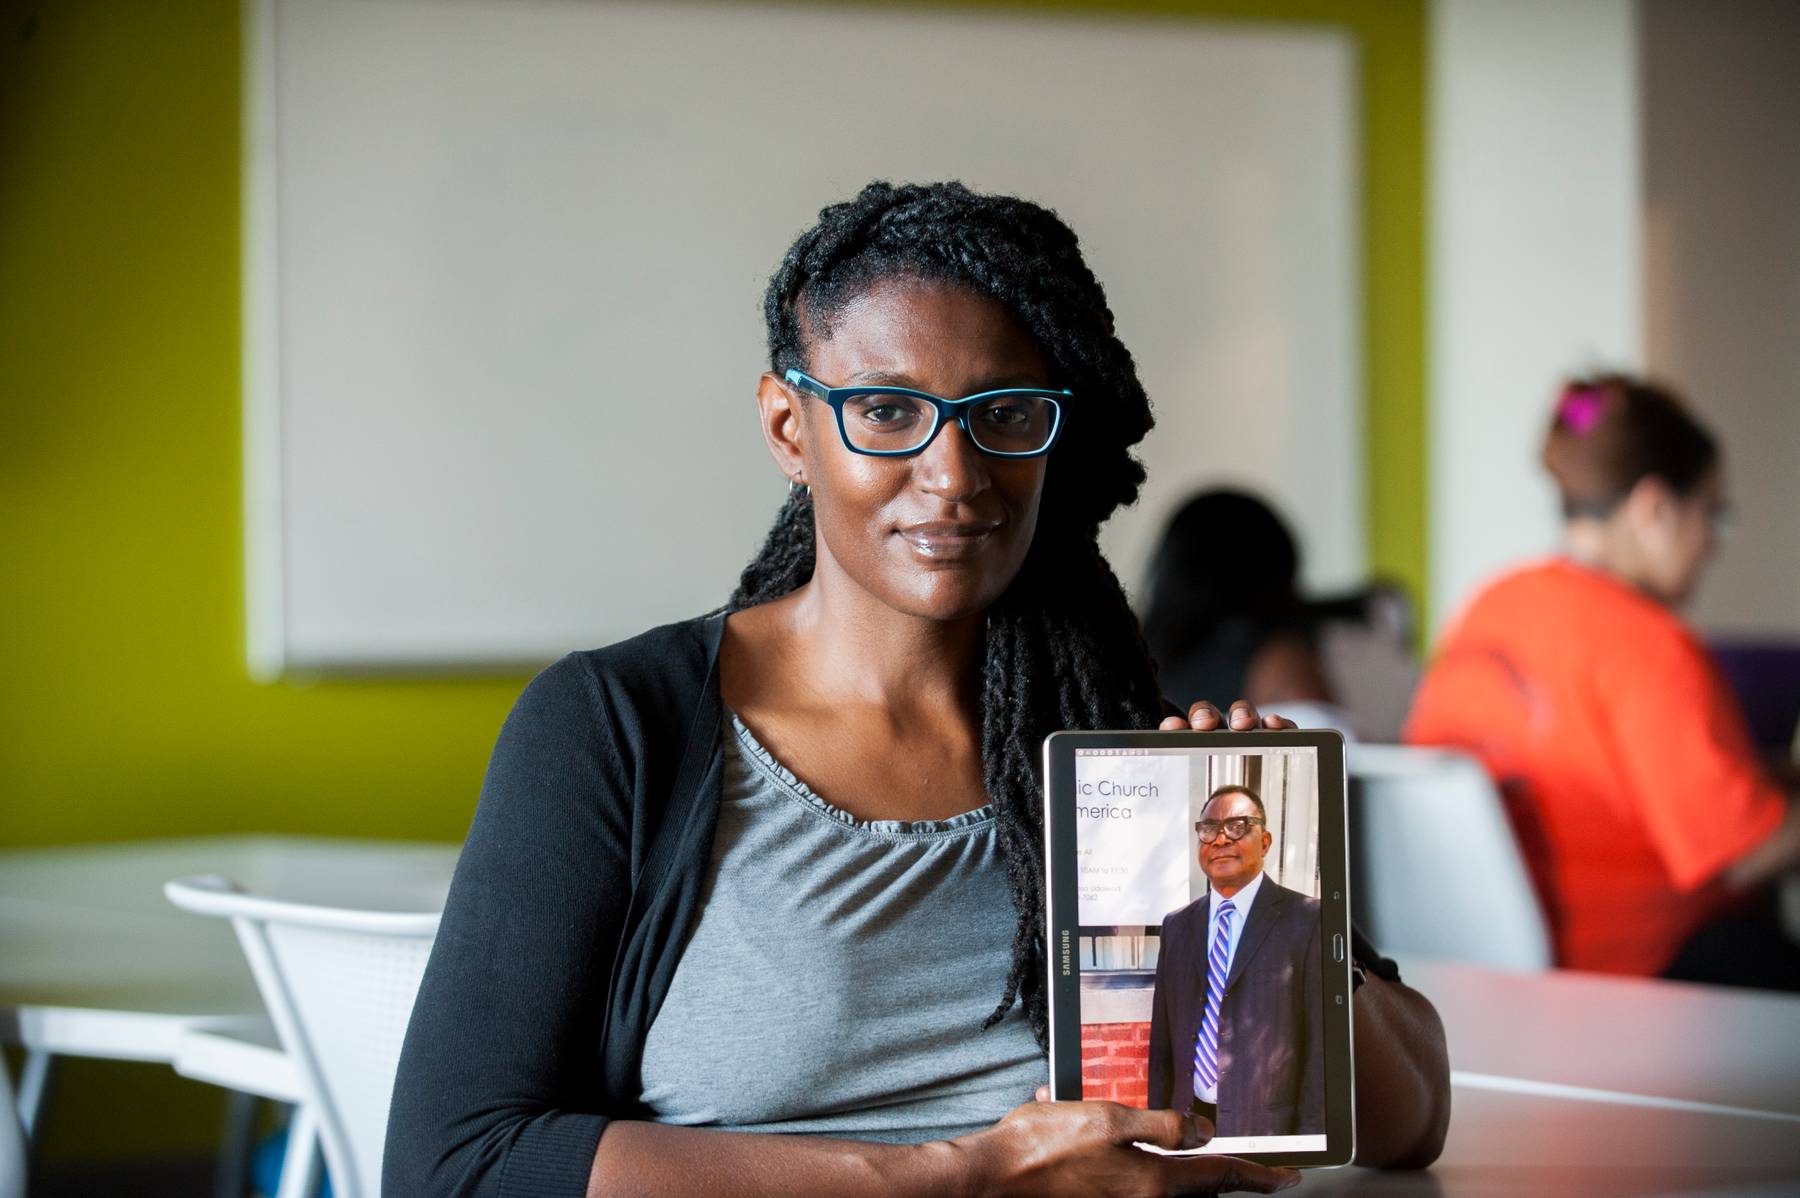 Ericka Mingo holds an iPad with a photo of her student Ndueso Odoiwod